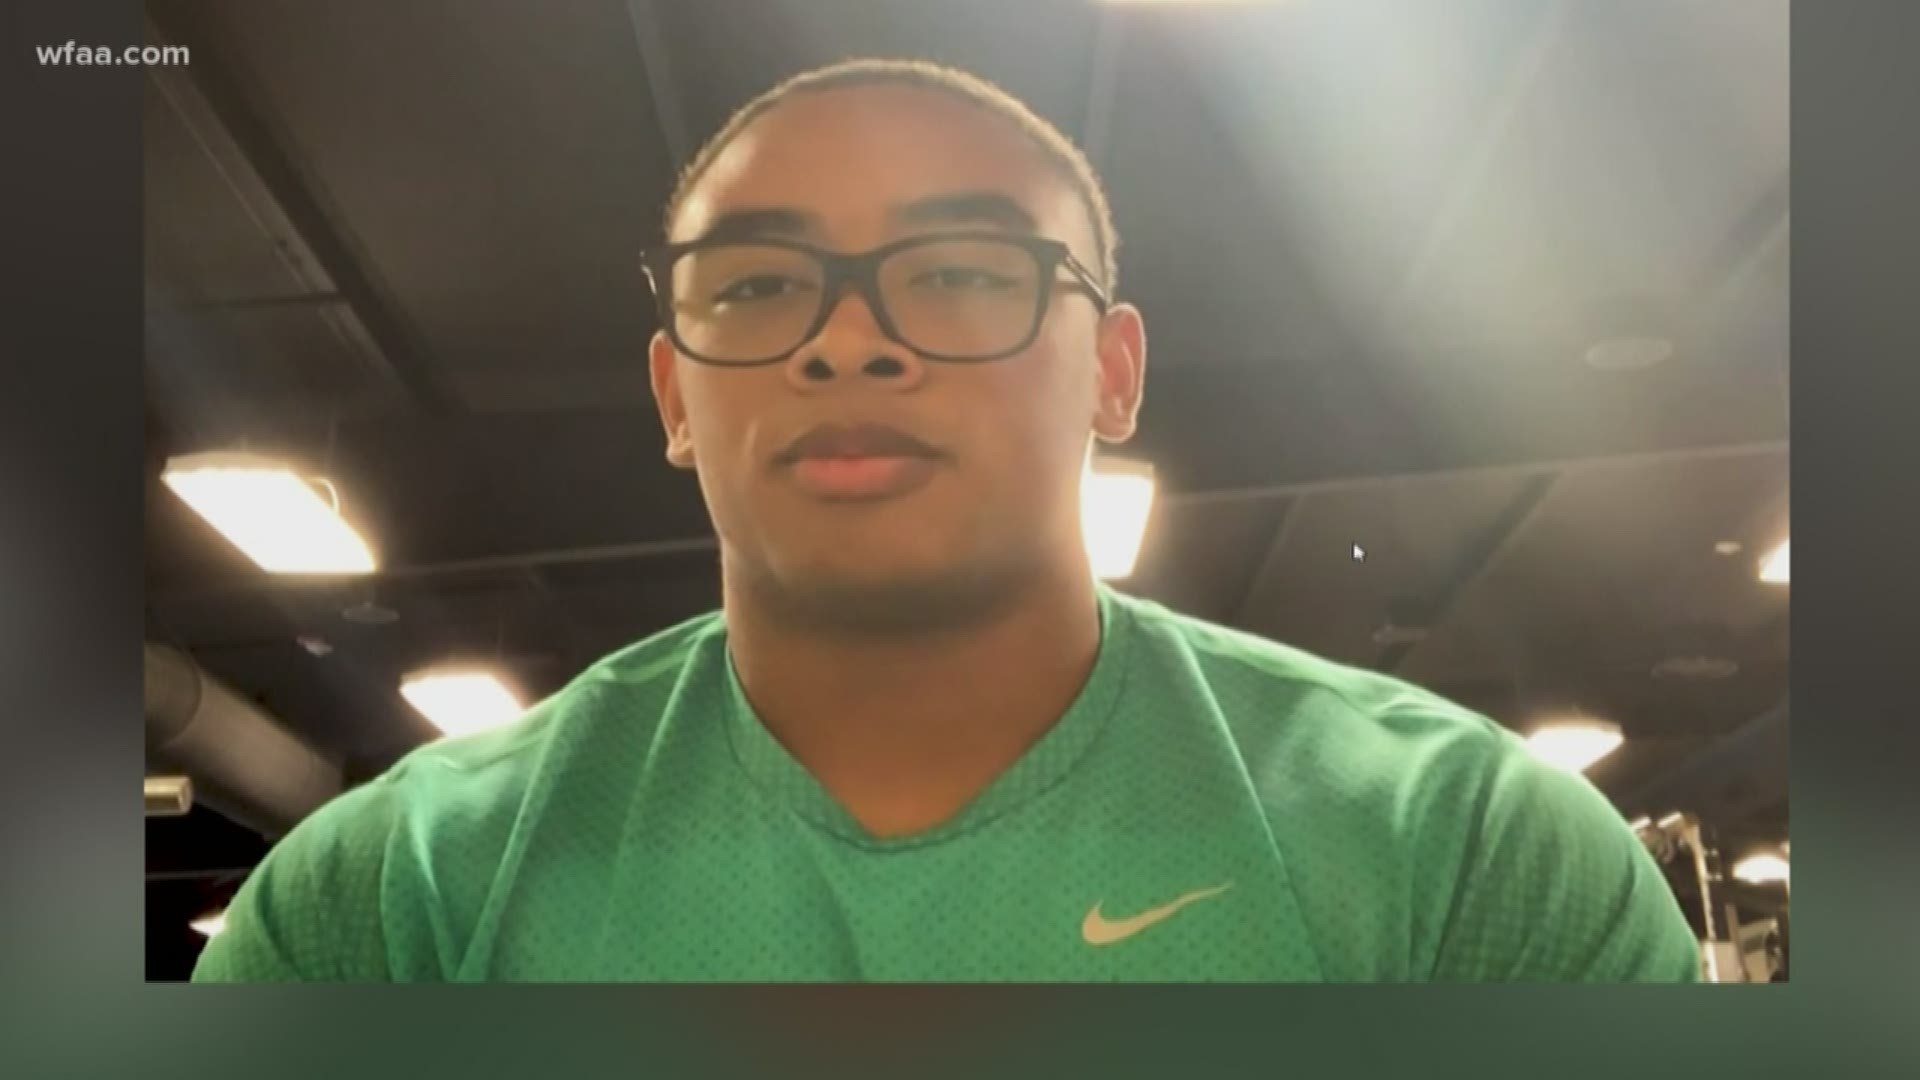 'I feel honored and humbled': Antonio Montez is among four students to receive a scholarship in memory of the young accountant killed by a Dallas police officer.